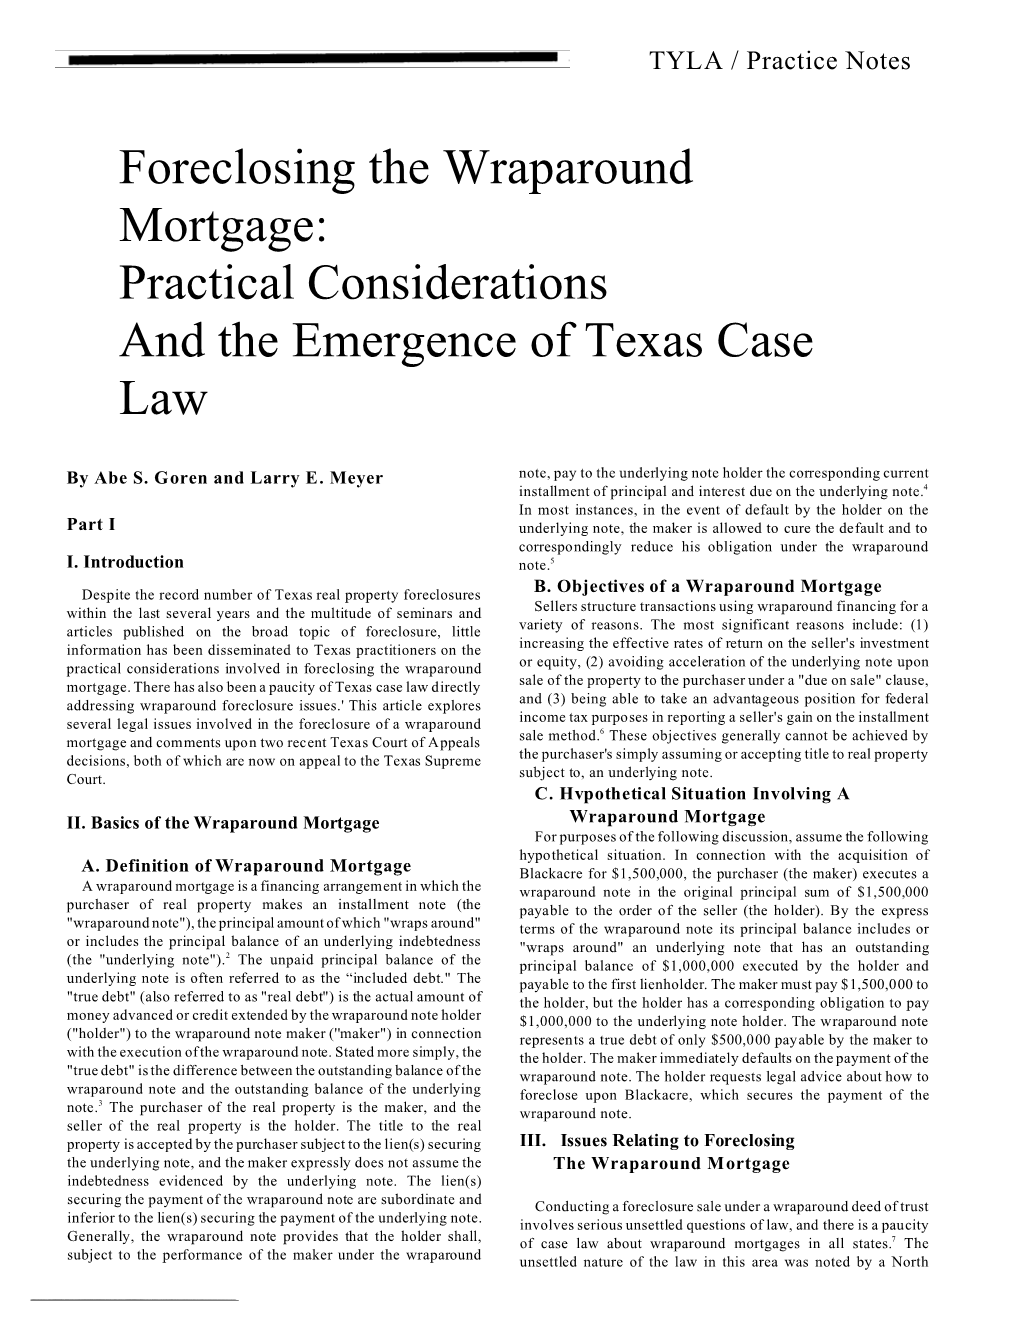 Foreclosing the Wraparound Mortgage: Practical Considerations and the Emergence of Texas Case Law